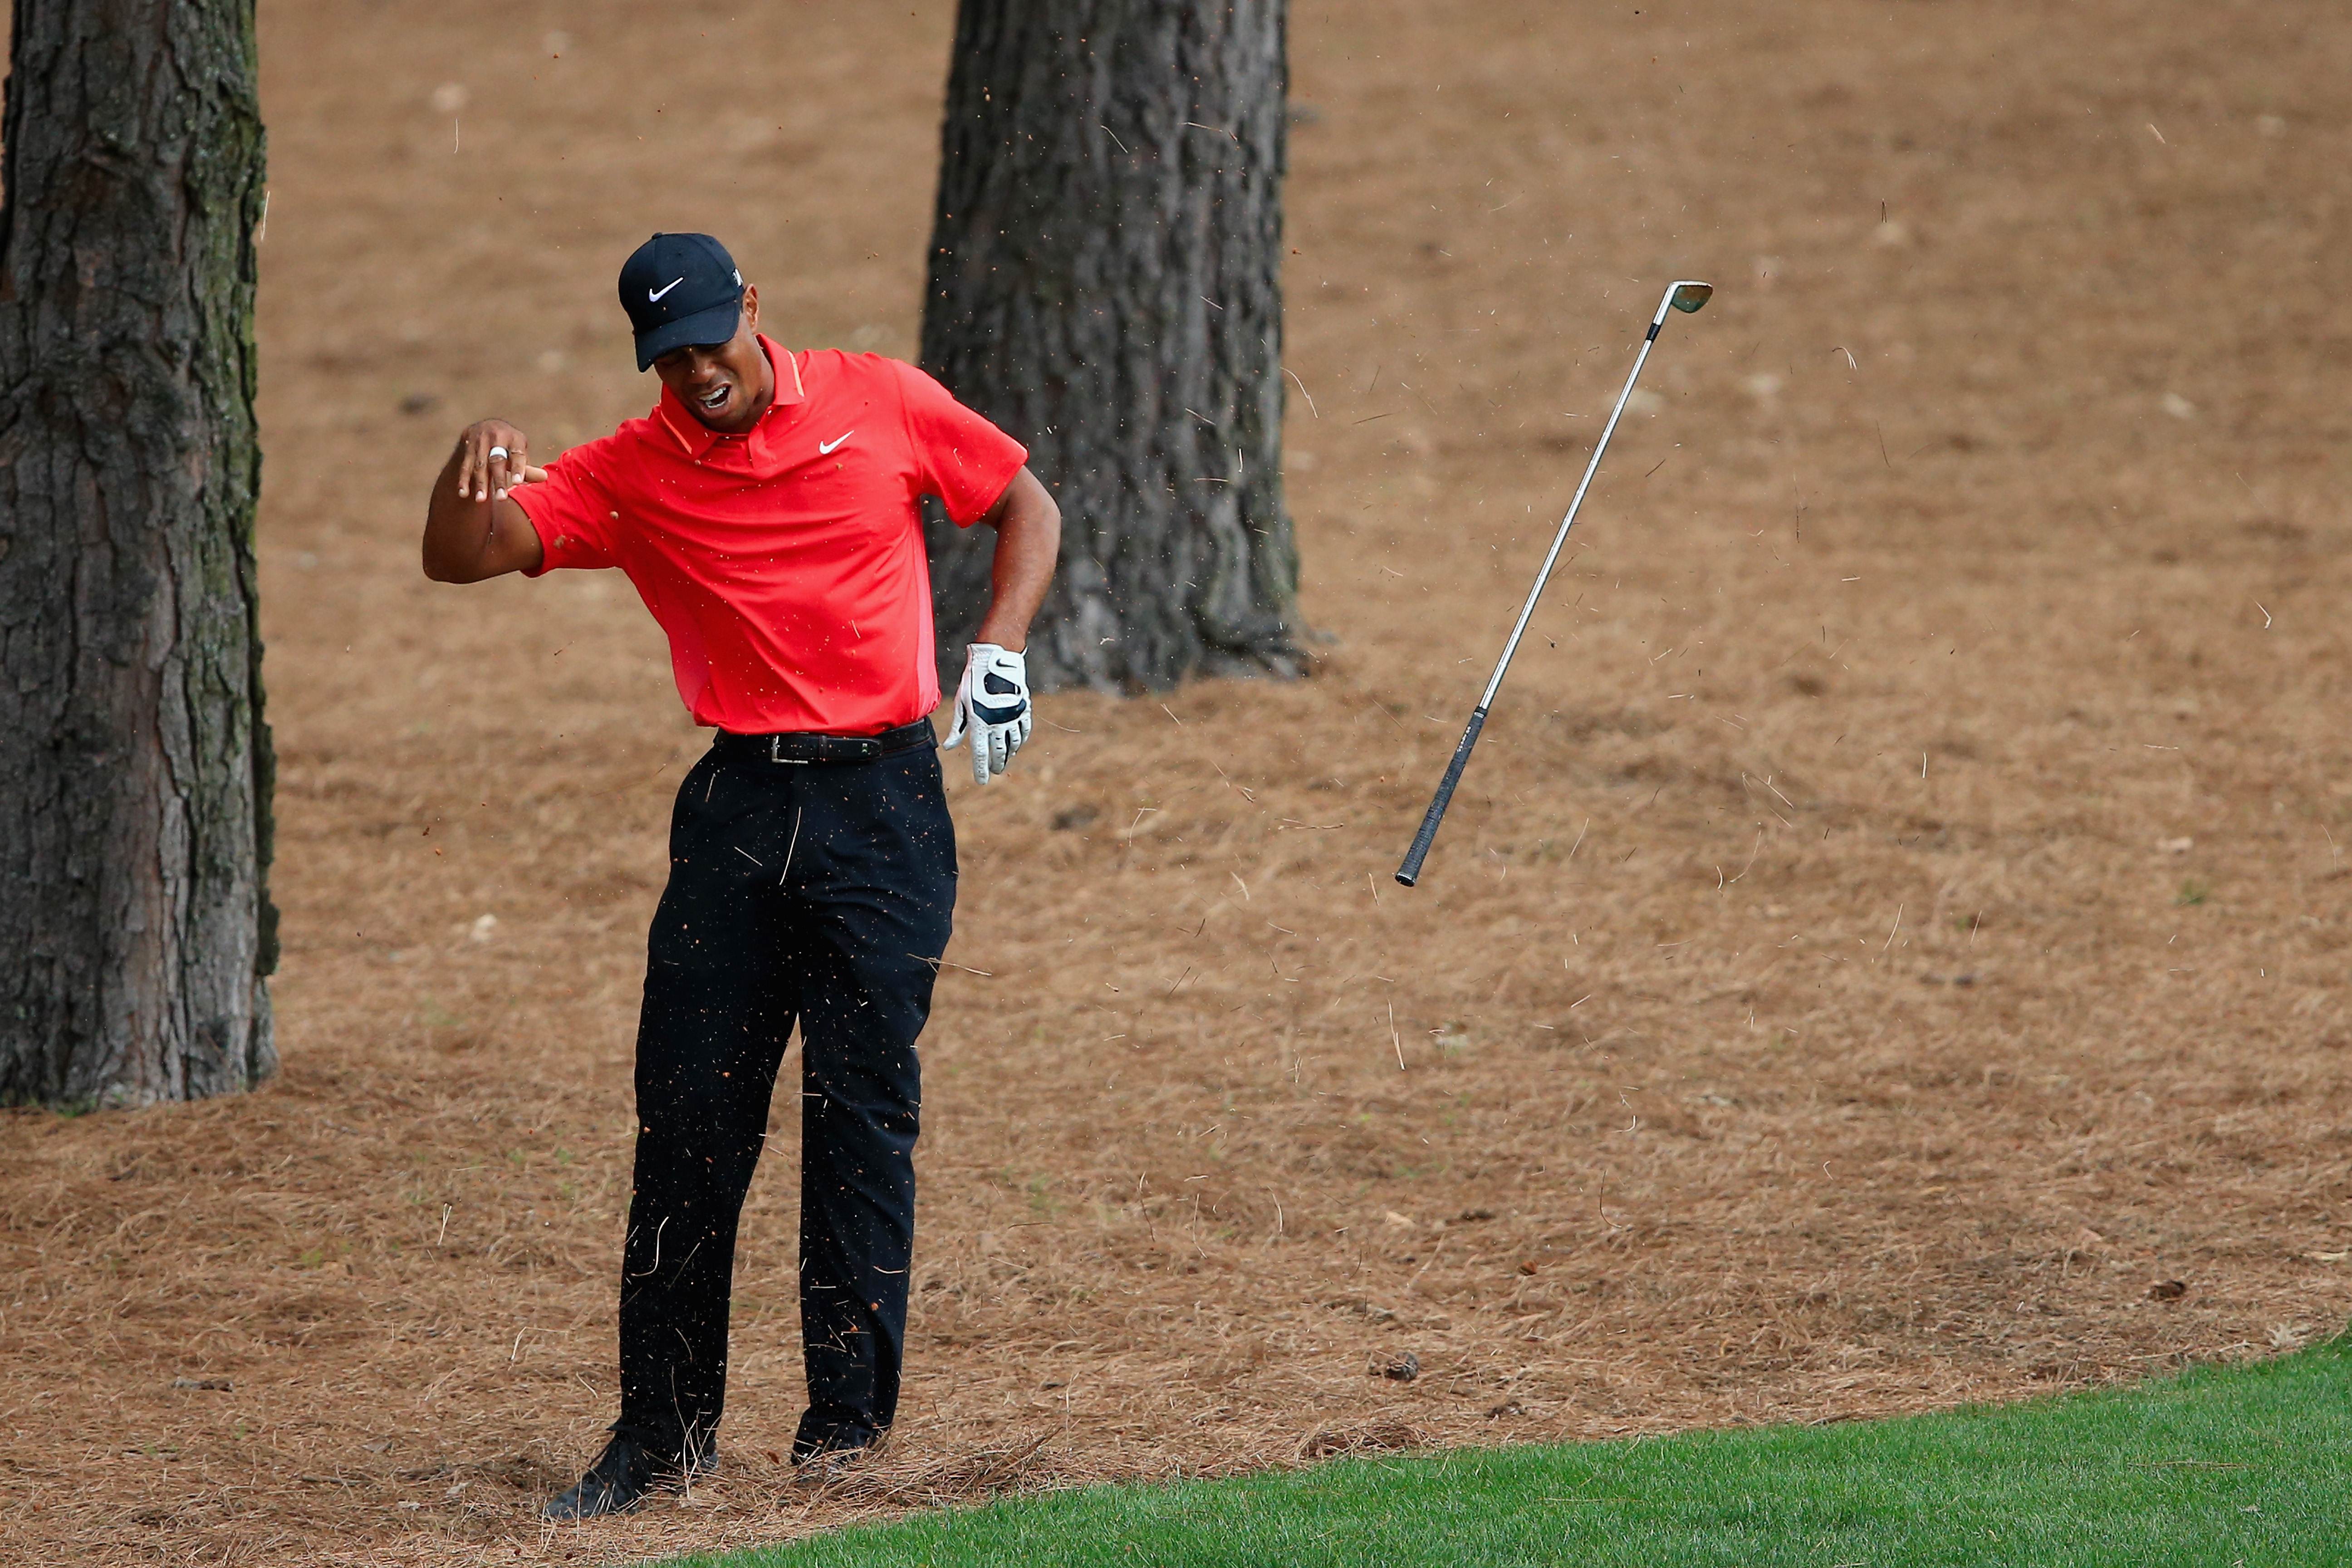 Tiger Woods flinches after hitting a tree root under the pine straw on the ninth hole during the final round of the Masters. "A bone kind of popped out and the joint kind of went out of place, but I put it back in," Woods said. Photo: AFP